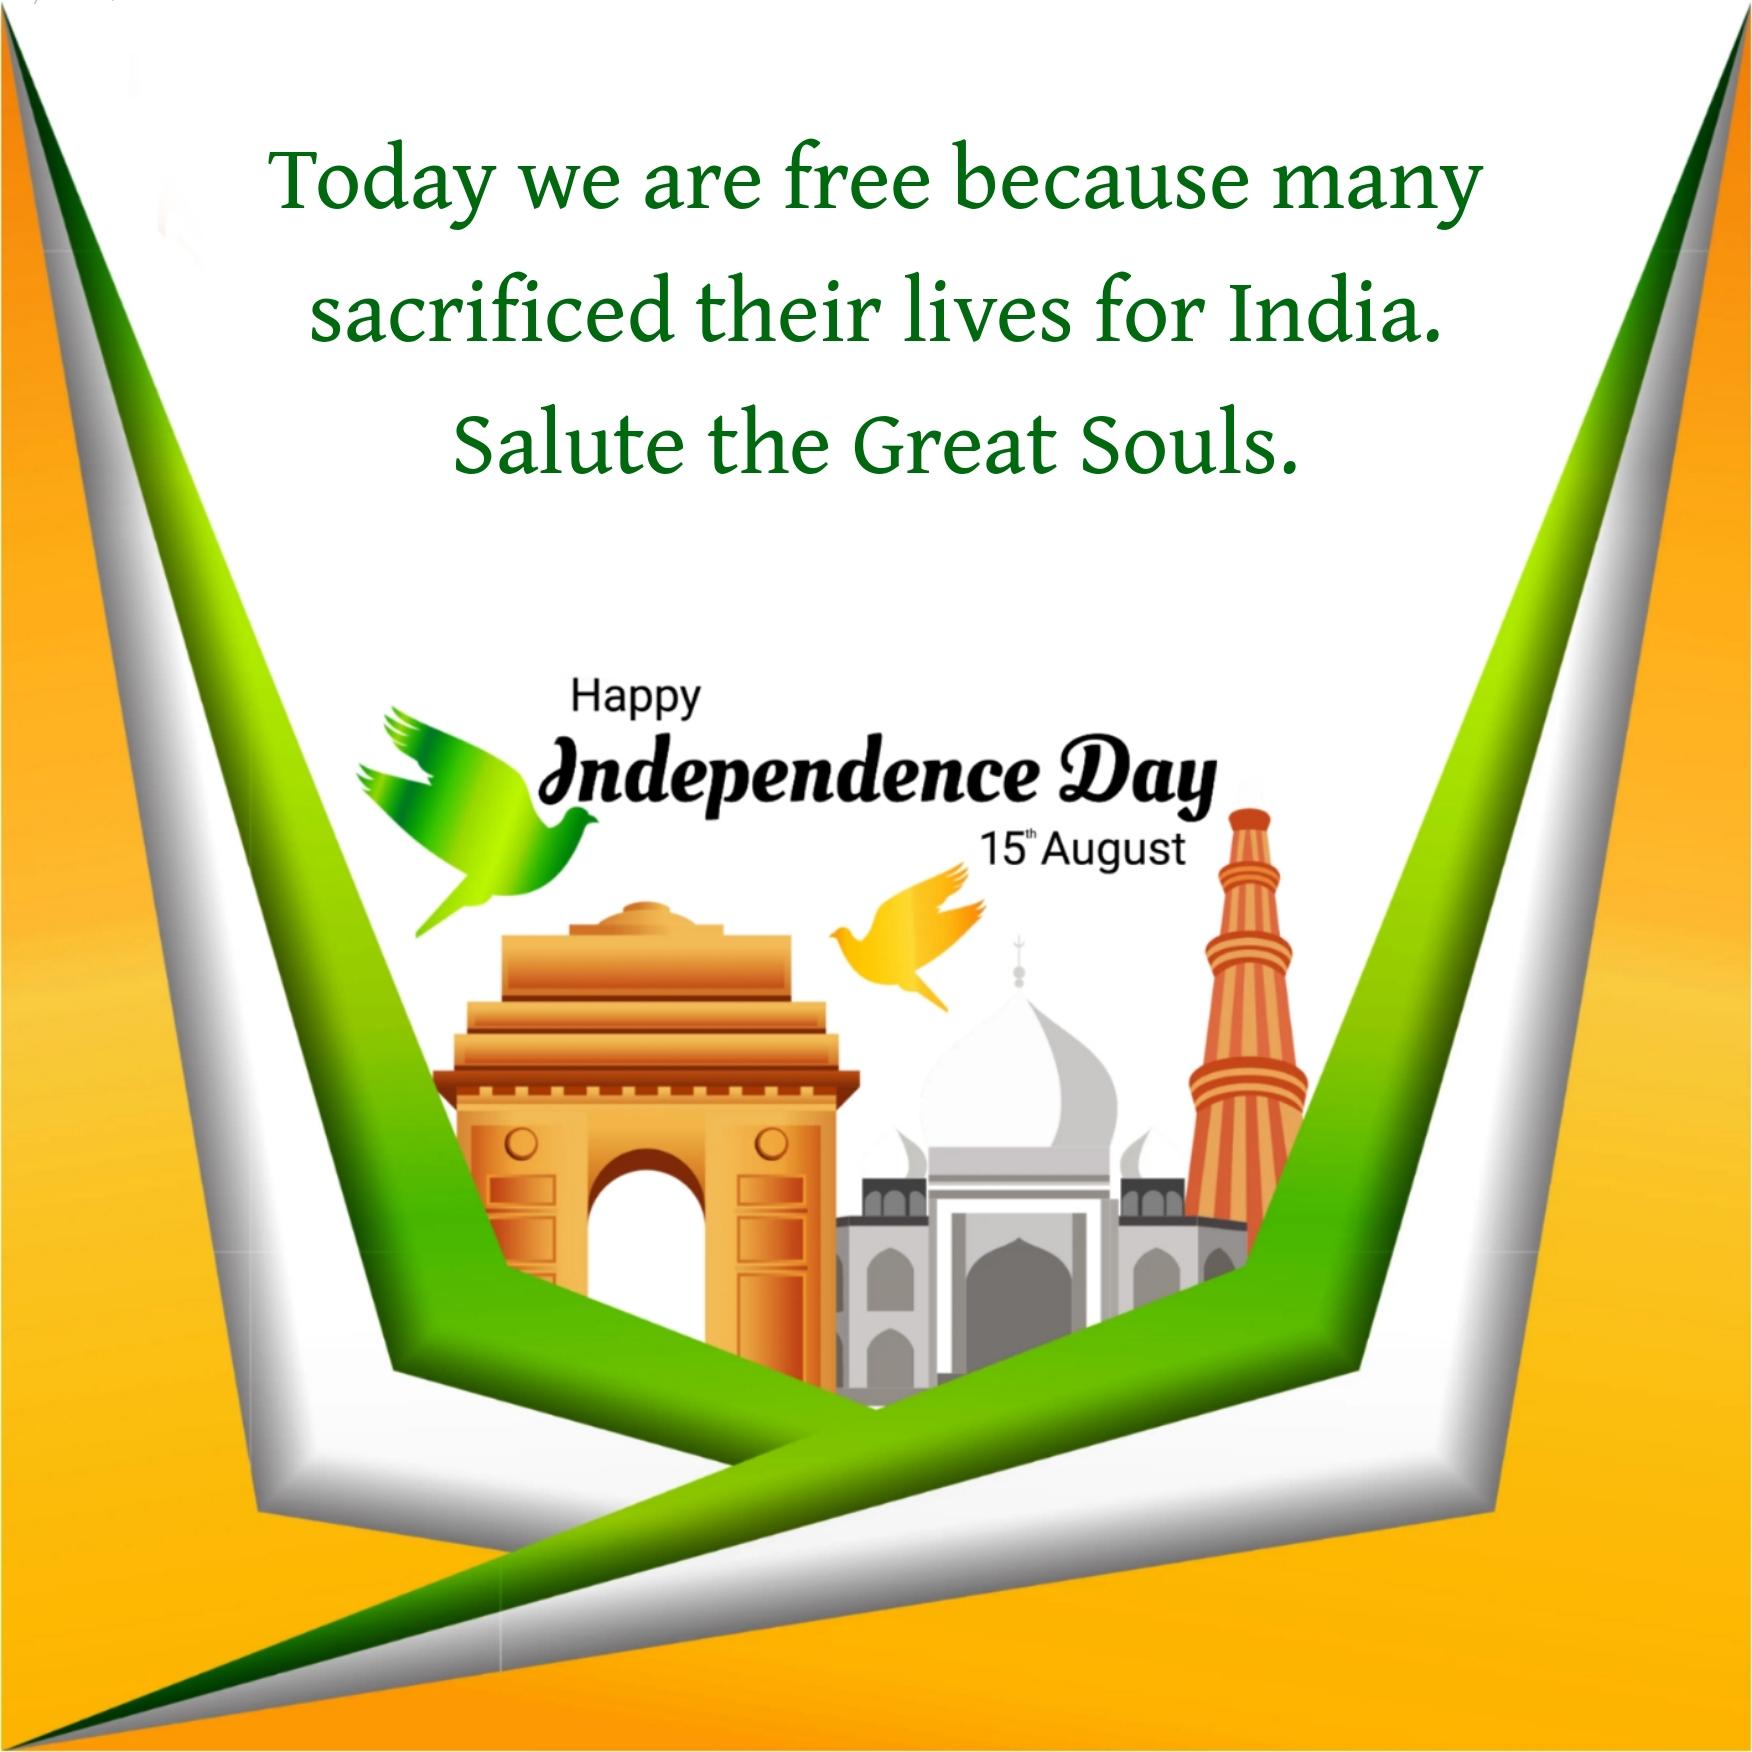 Today we are free because many sacrificed their lives for India